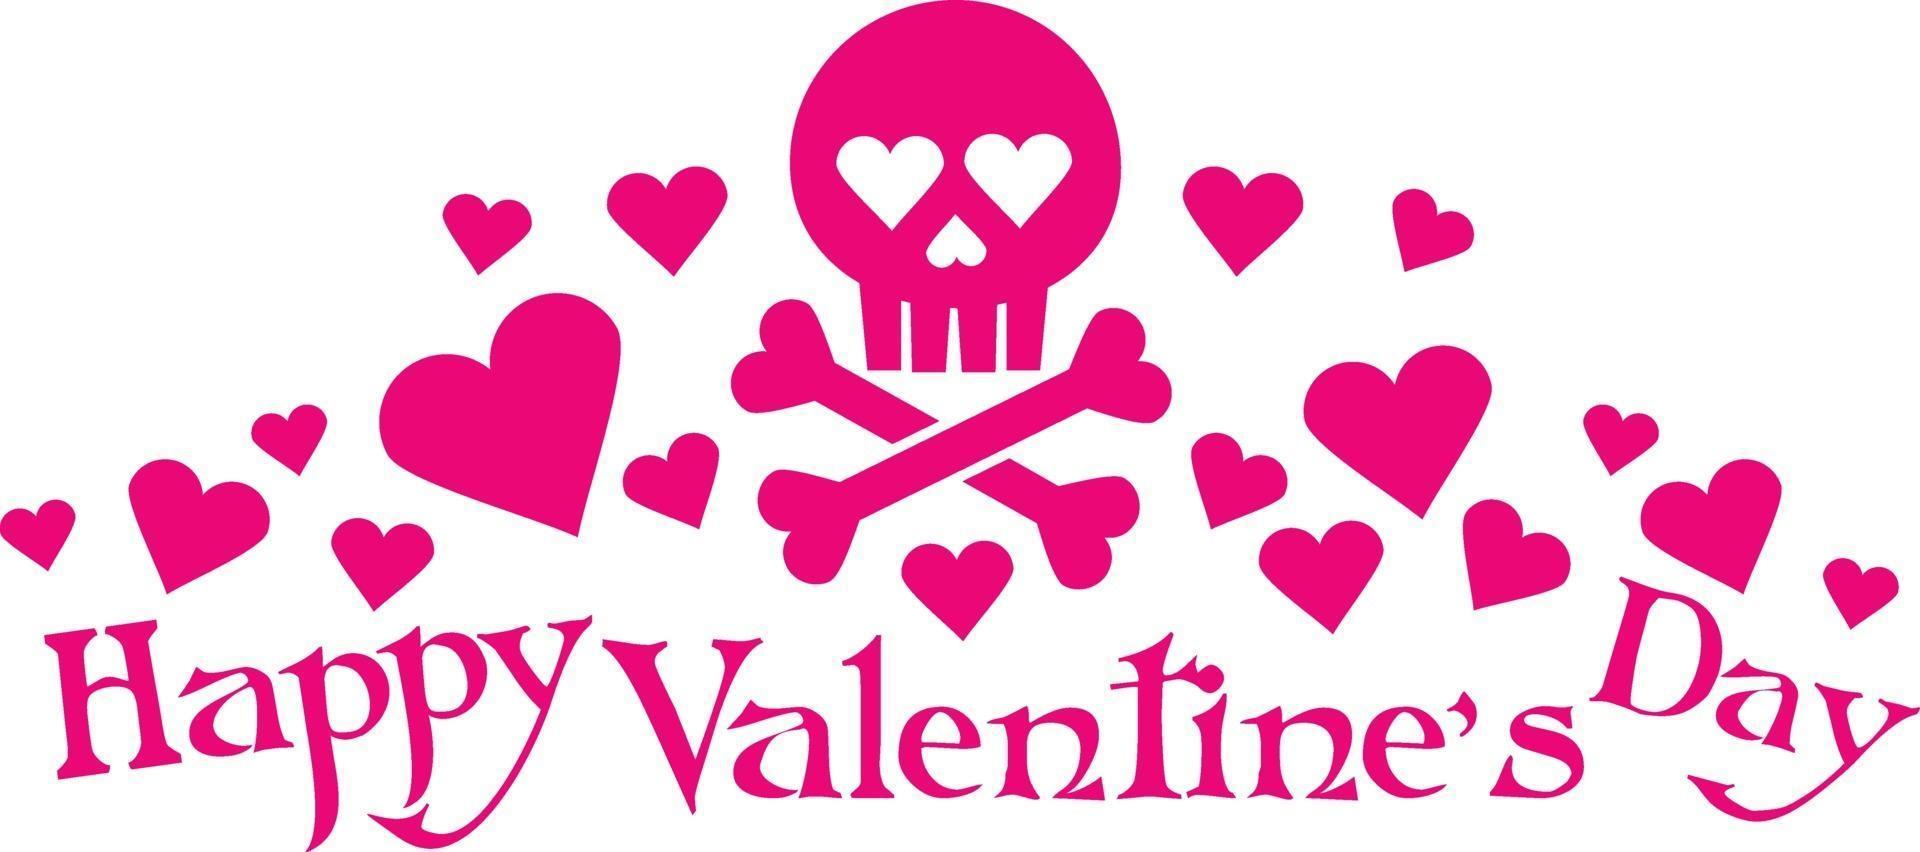 Valentines day skull with heart, grunge vintage design t shirts vector